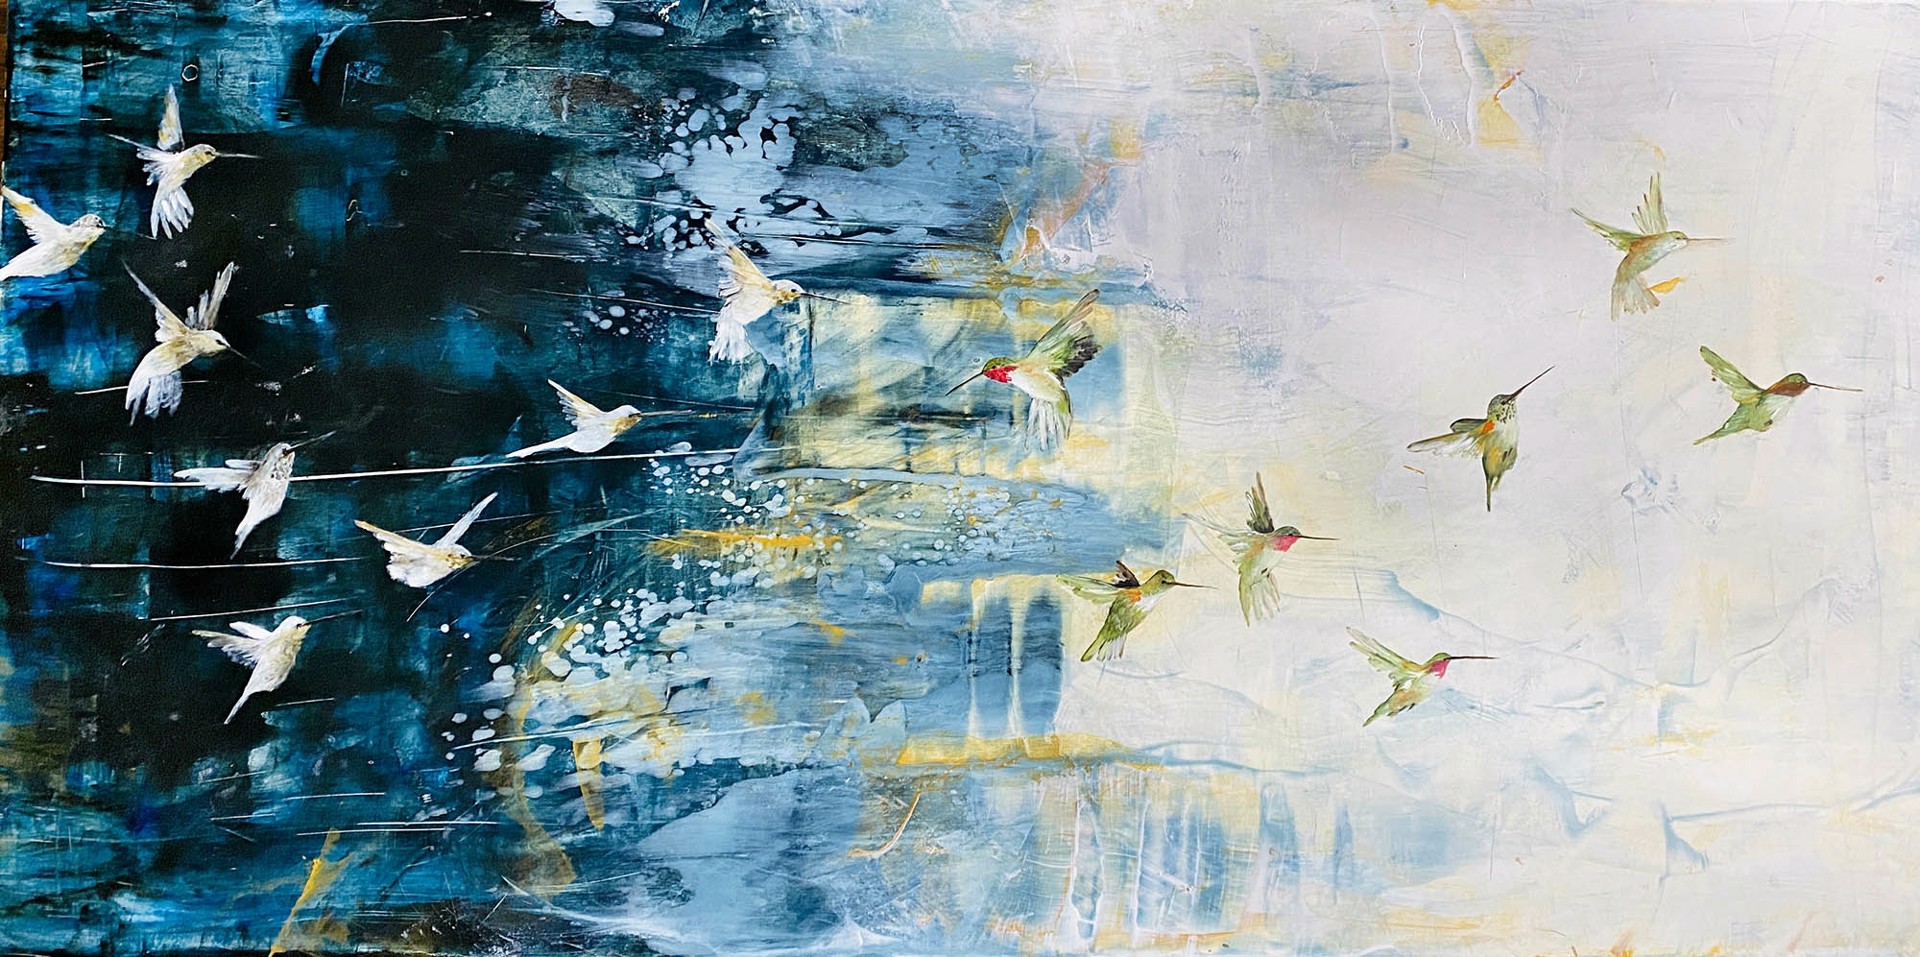 Original Oil Painting Featuring Hummingbirds in Flight Over Abstract Dark Blue To Light Yellow Gradient Background